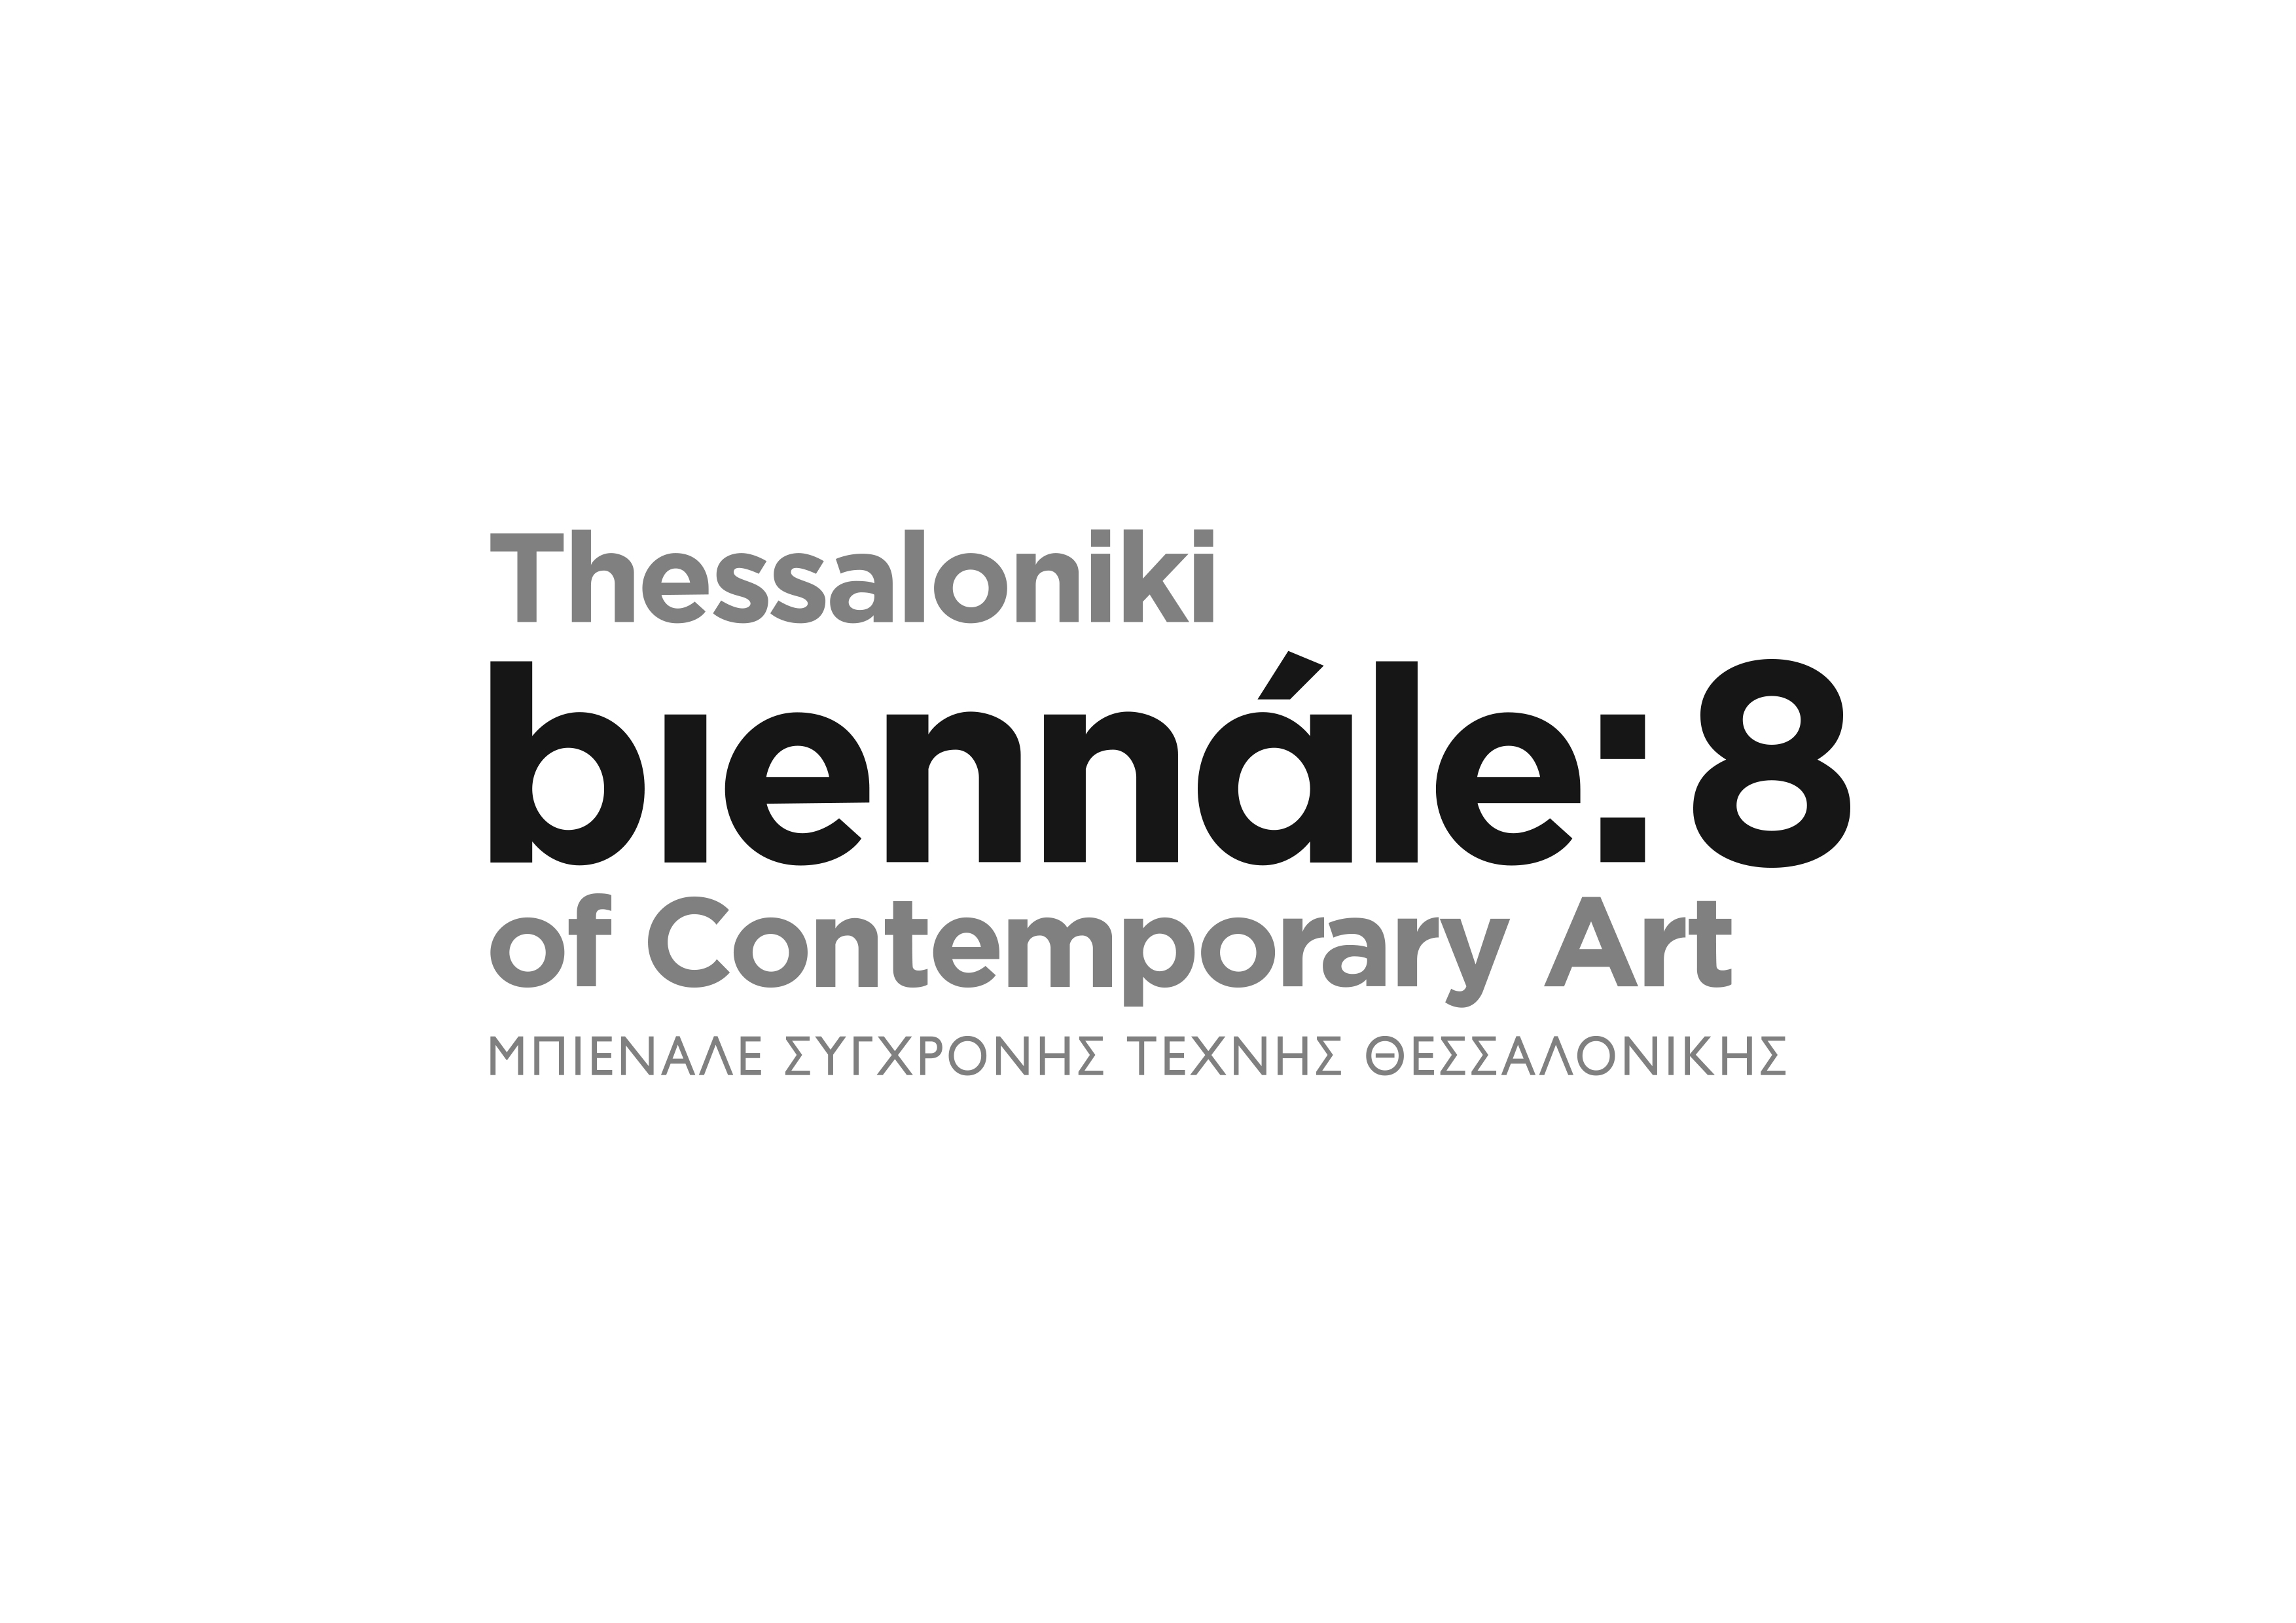 New dates for the 8th Thessaloniki Biennale of Contemporary Art